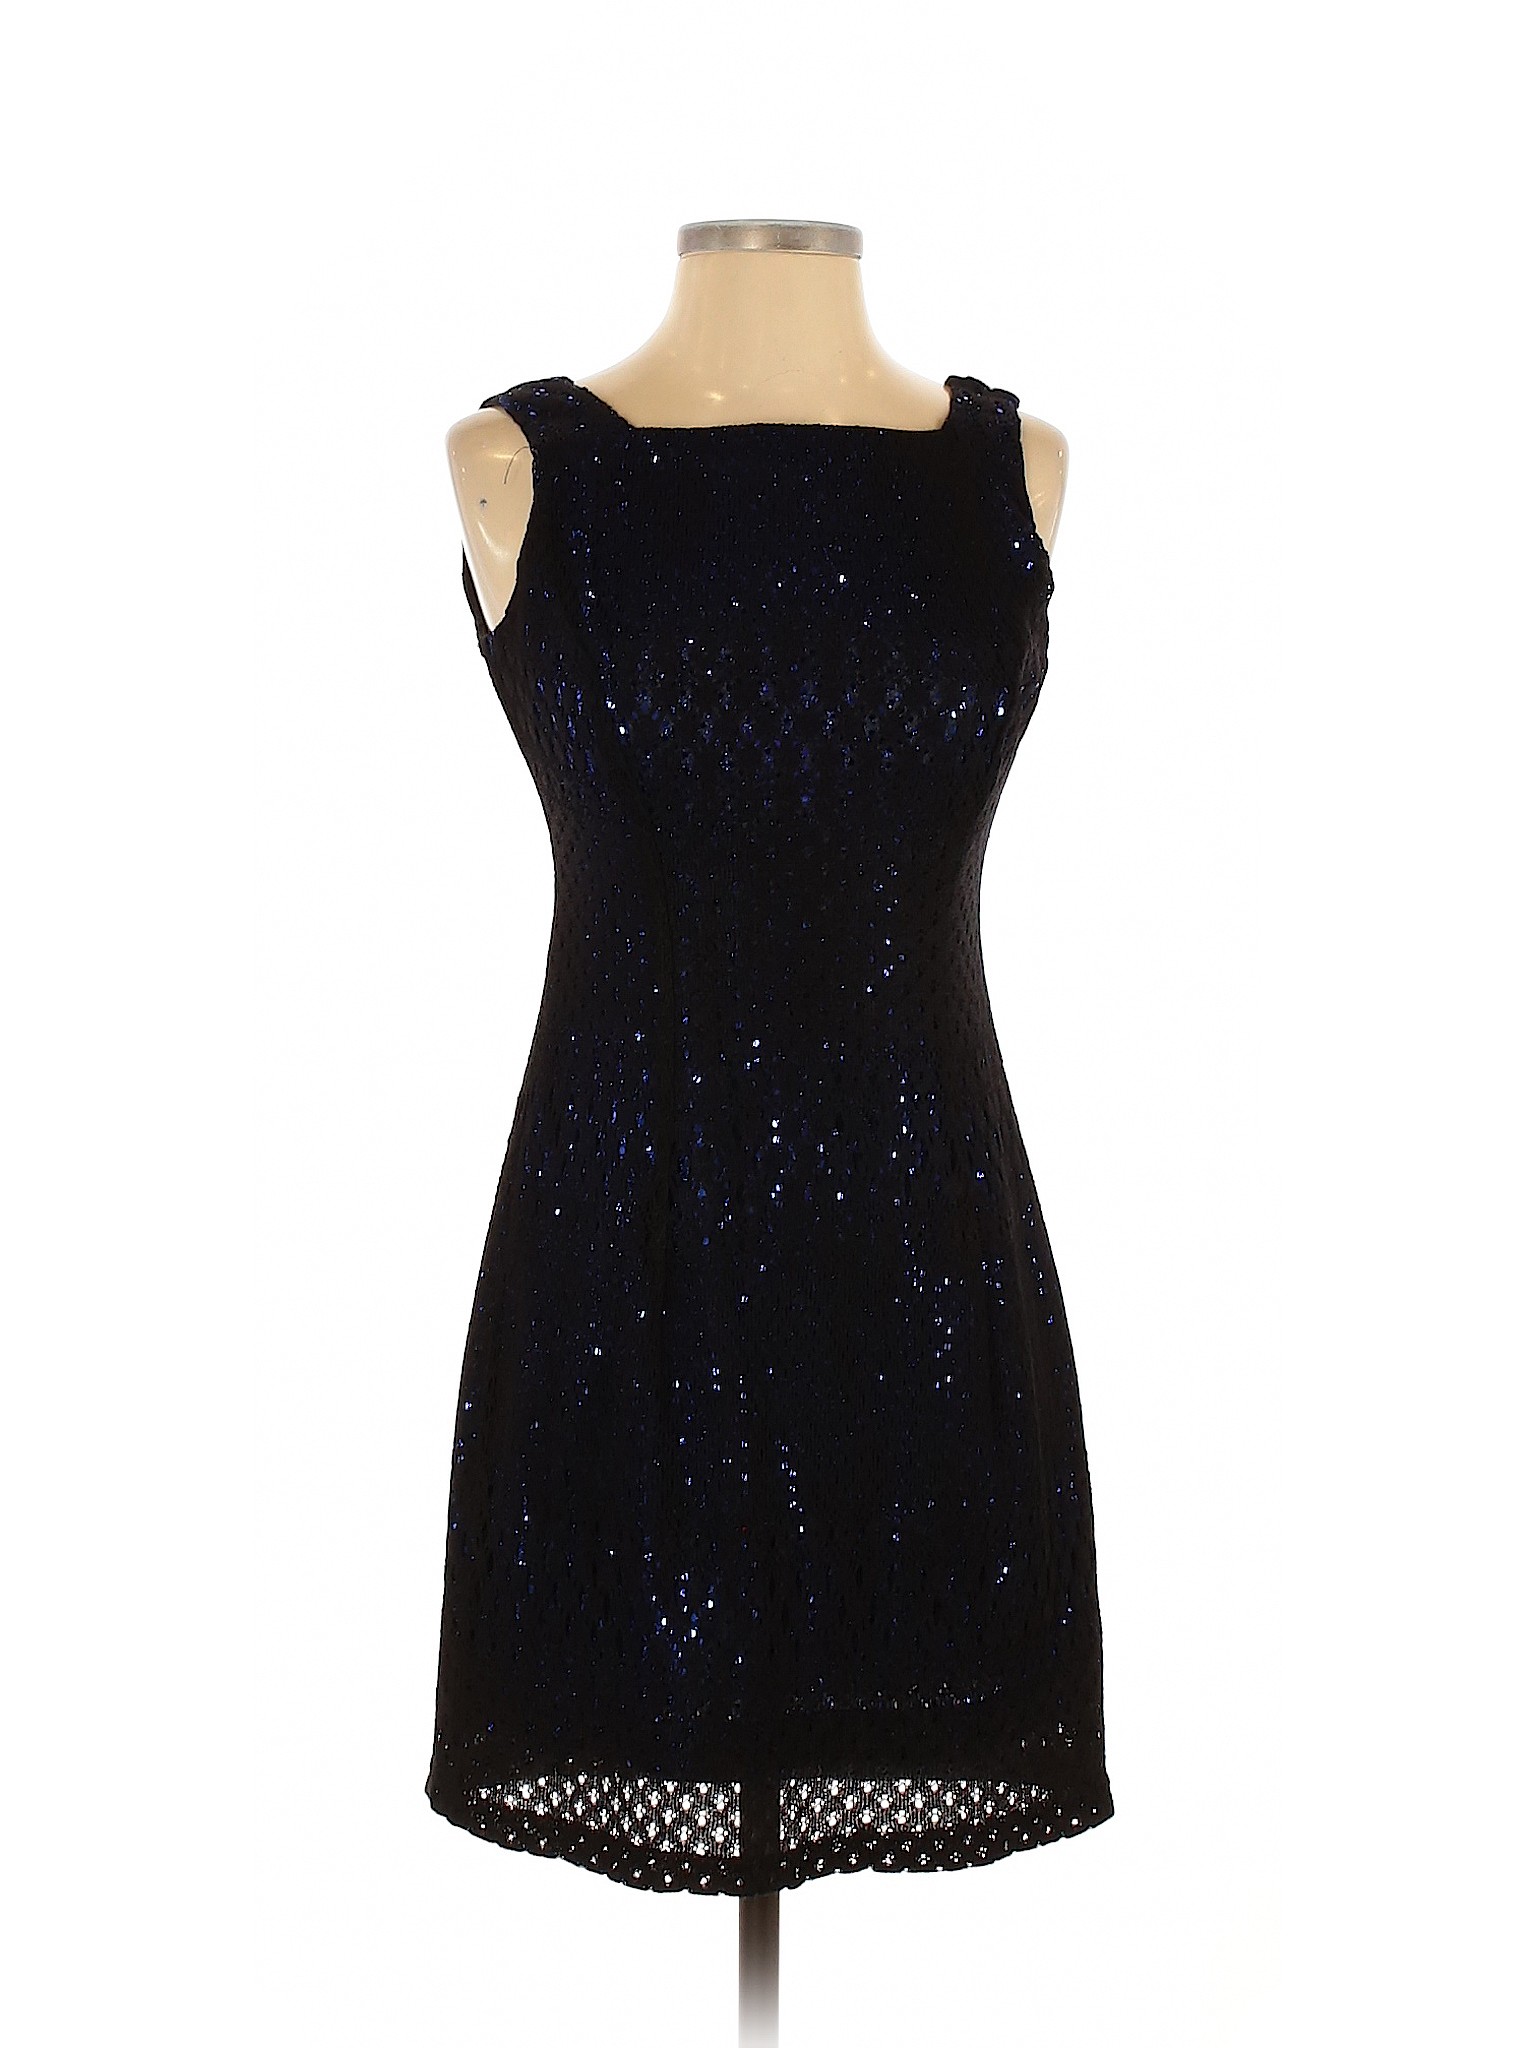 Molly Malloy 100% Acetate Solid Black Cocktail Dress Size 4 (Petite ...